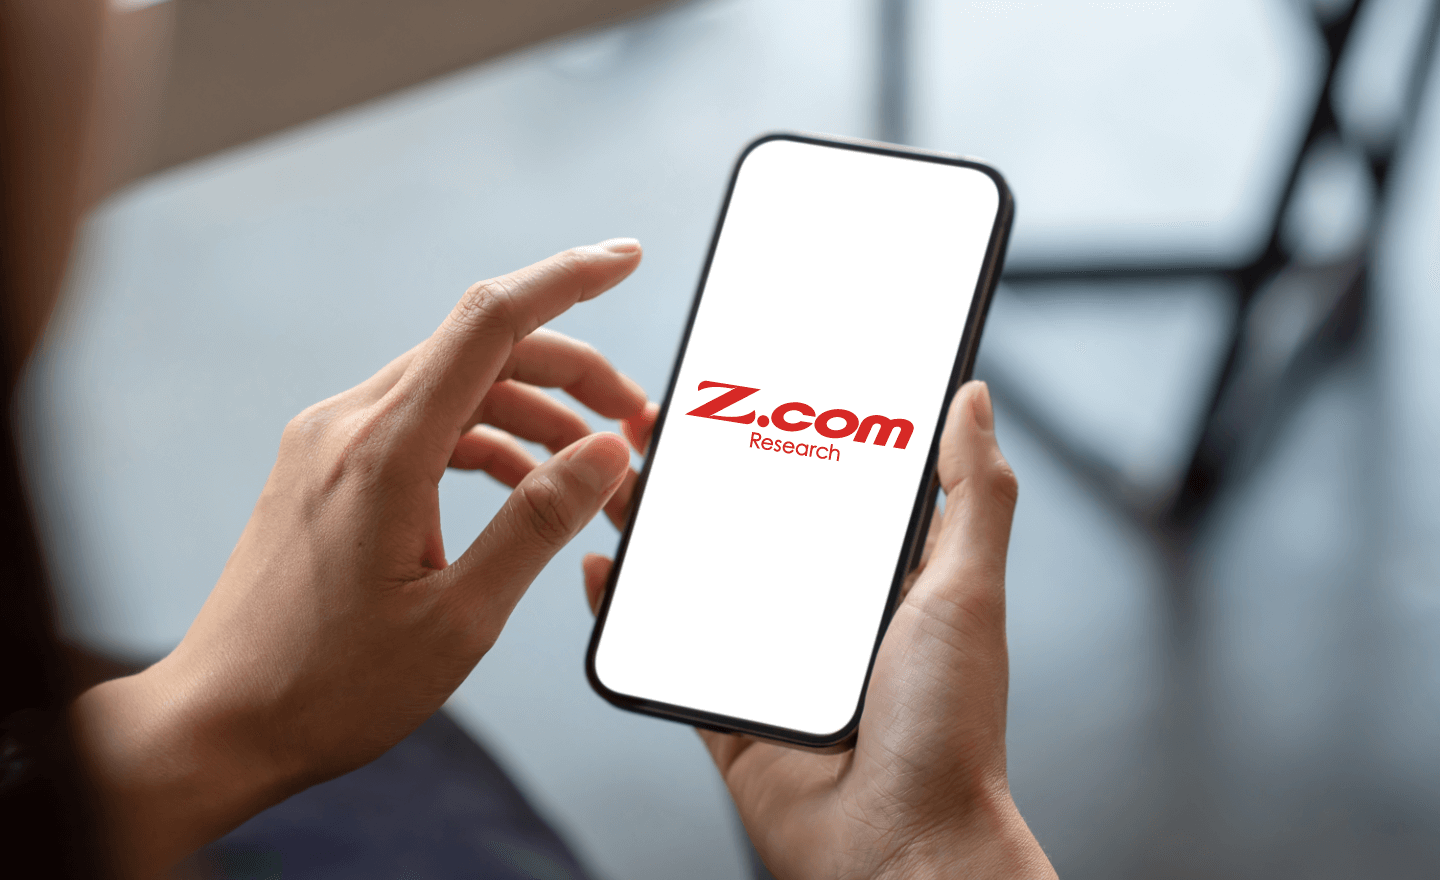 What is Z.com Research?